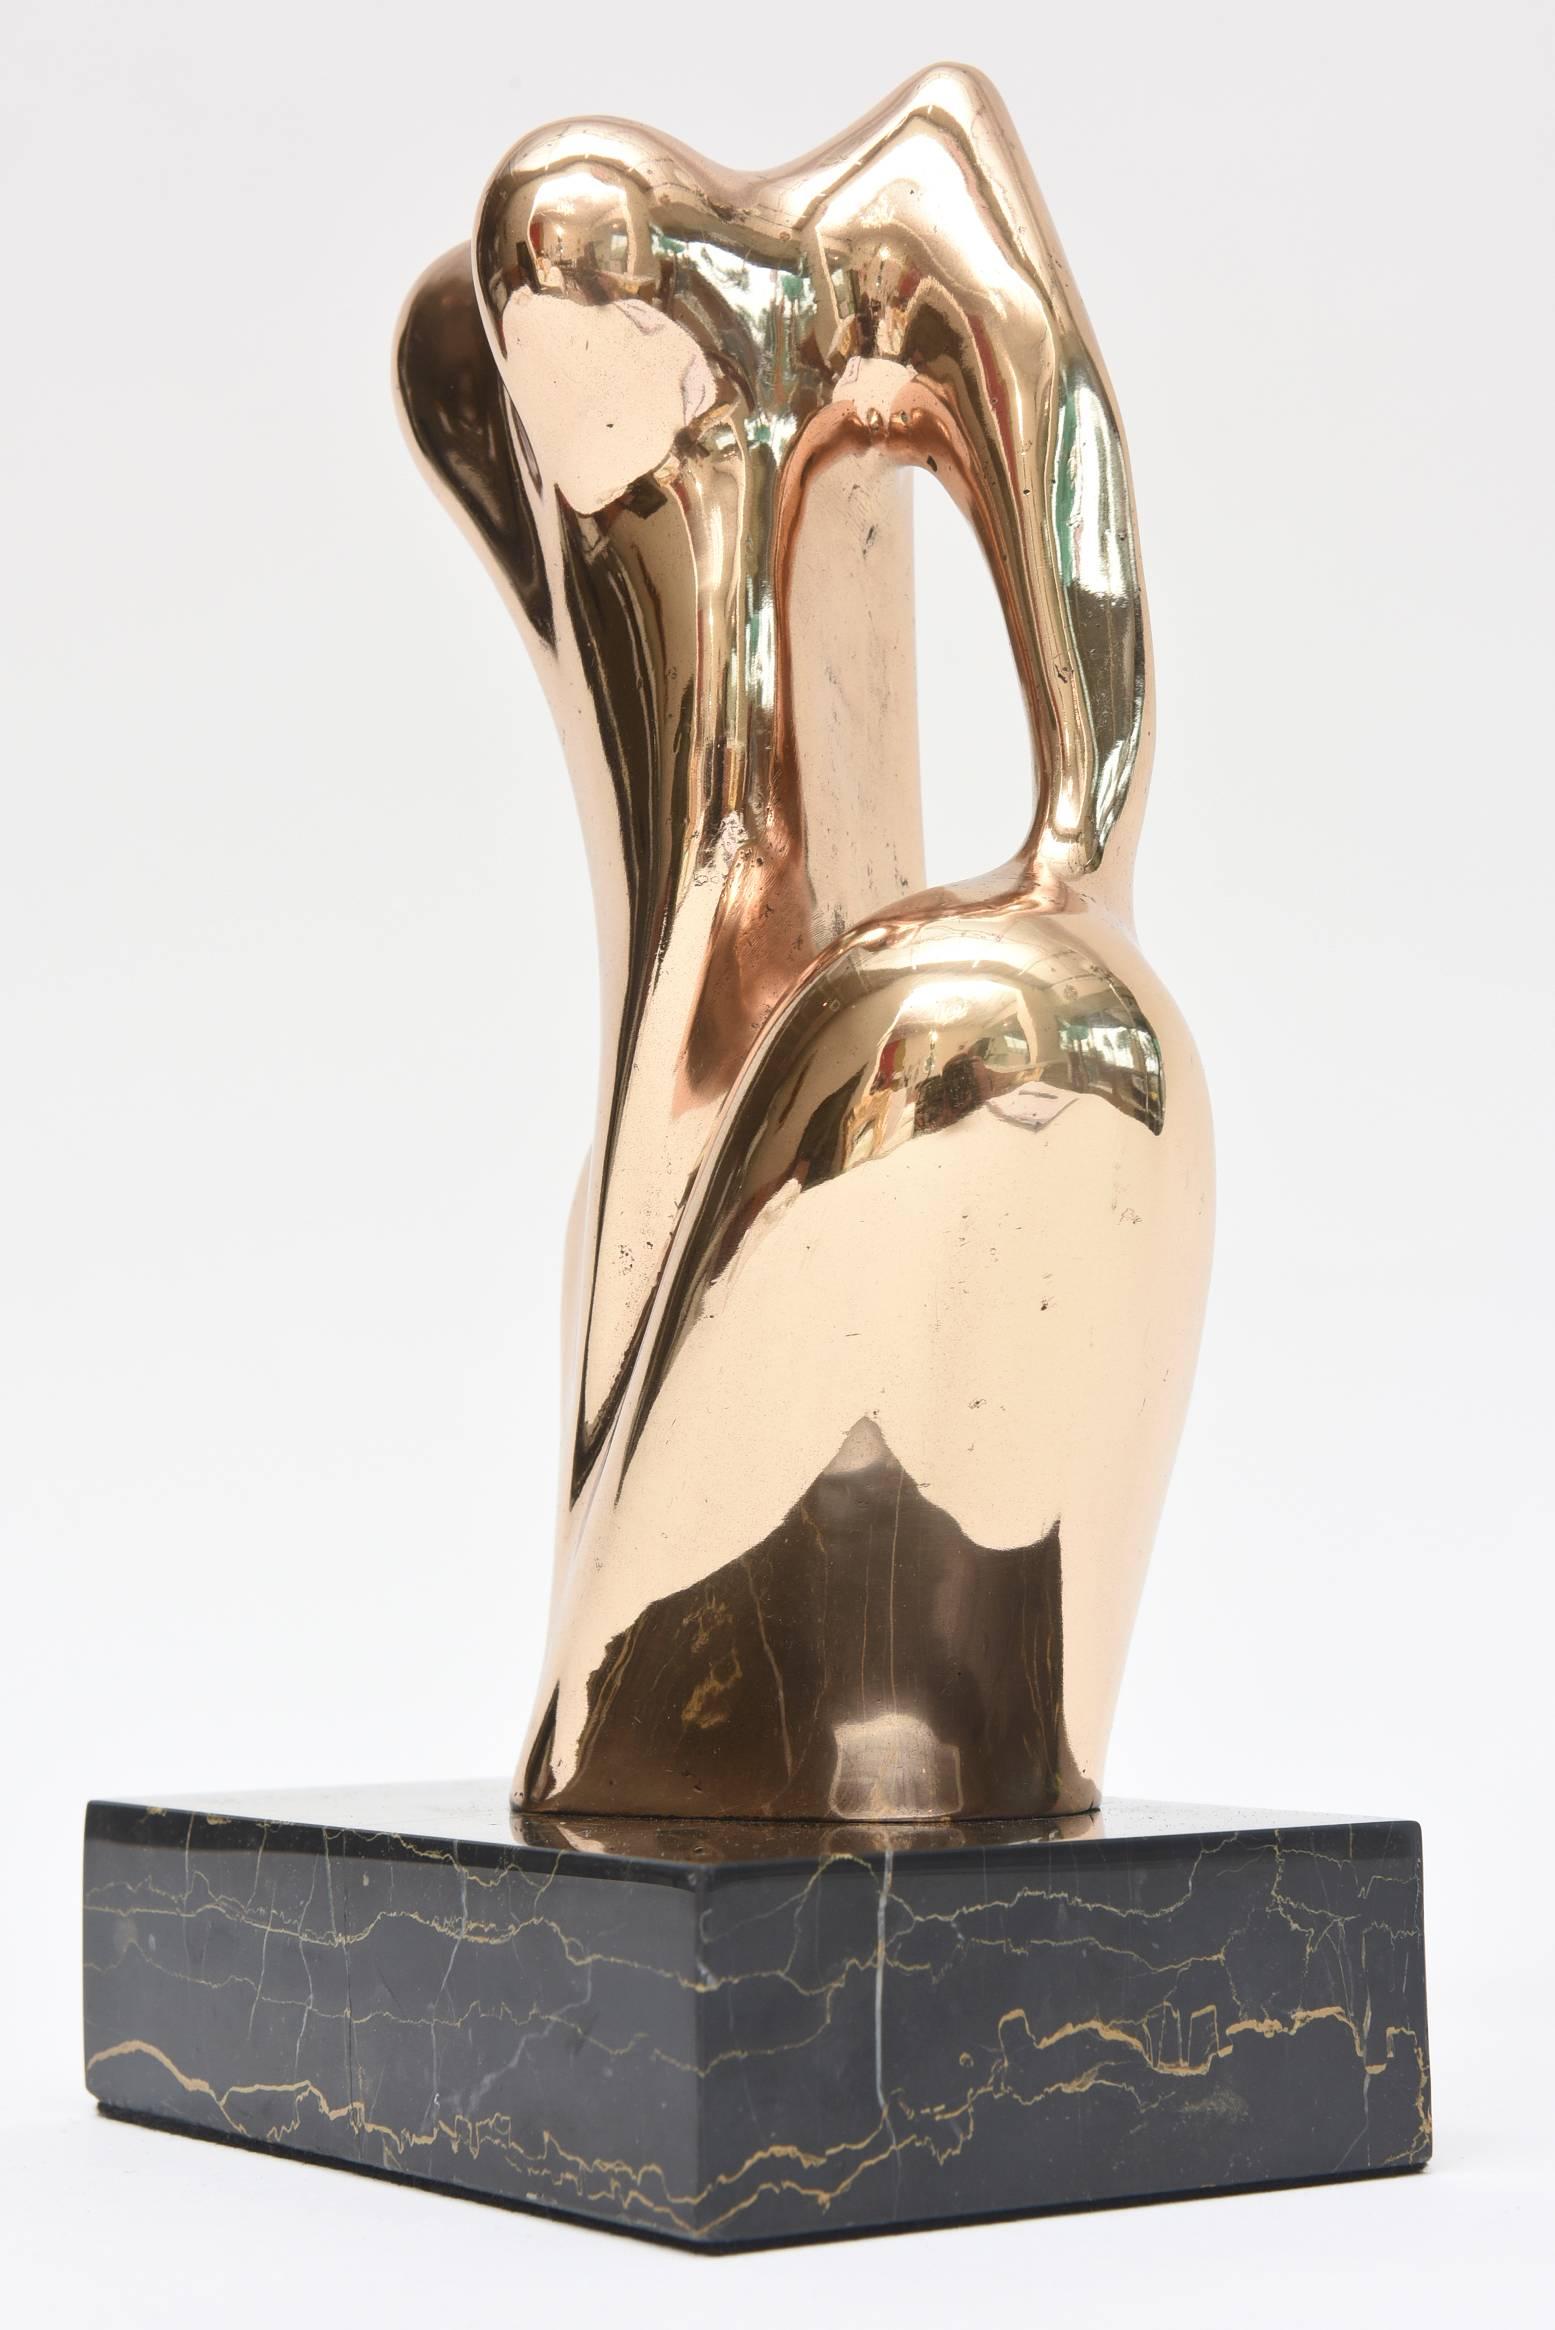 This fantastic female nude bronze abstract sculpture on its original black and gold veined marble base has interesting forms and shapes from all sides. There is a signature on it but unfortunately it is not legible. There is a deep sensuality to it.